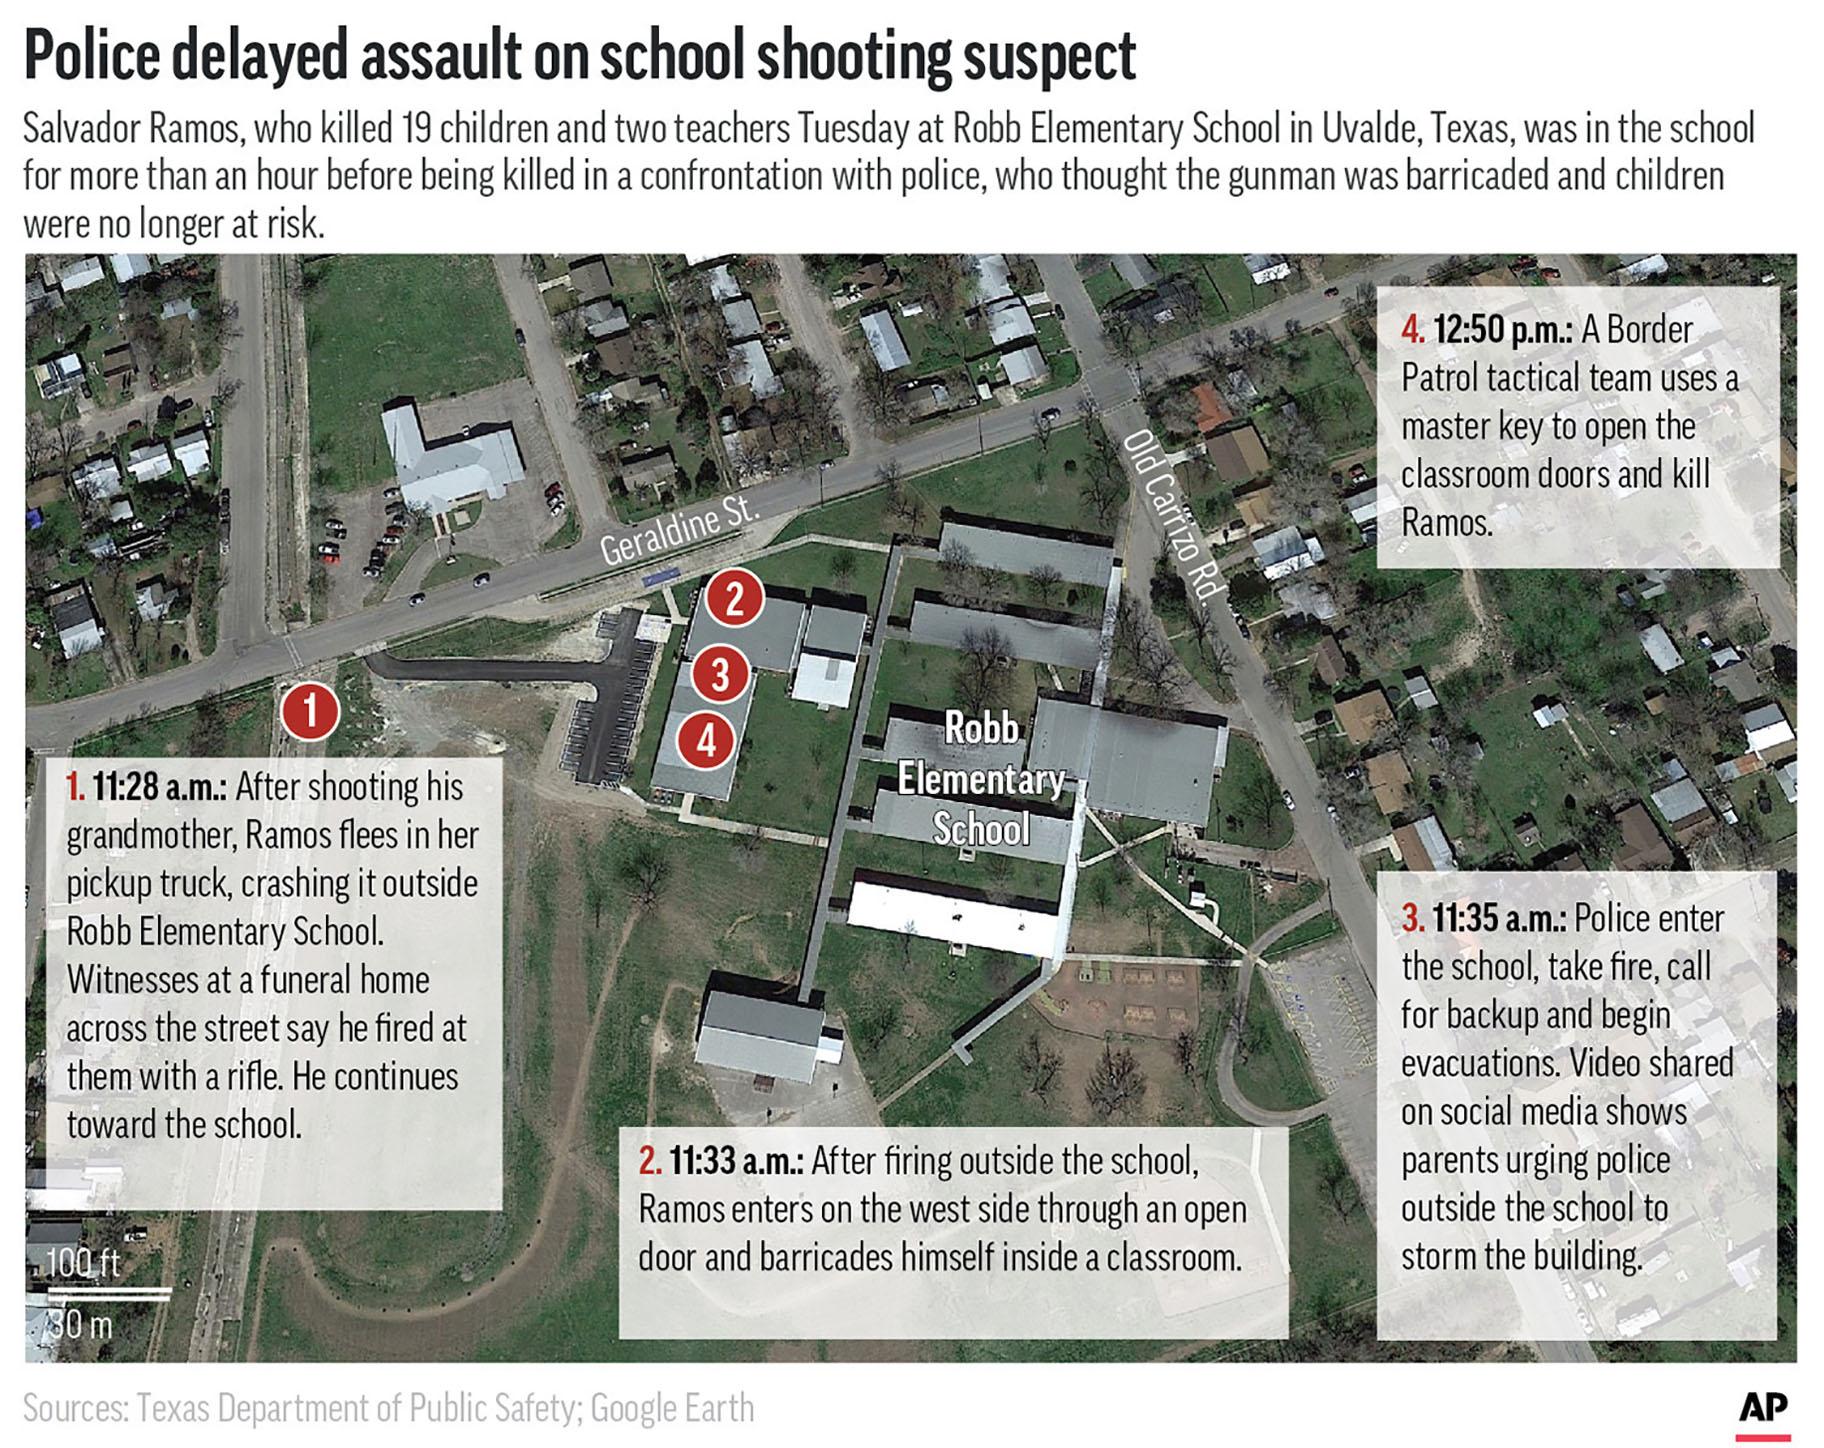 Police responding to Tuesday's school shooting in Uvalde, Texas, waited killing the assailant, believing he was barricaded in a classroom. (AP Graphic)